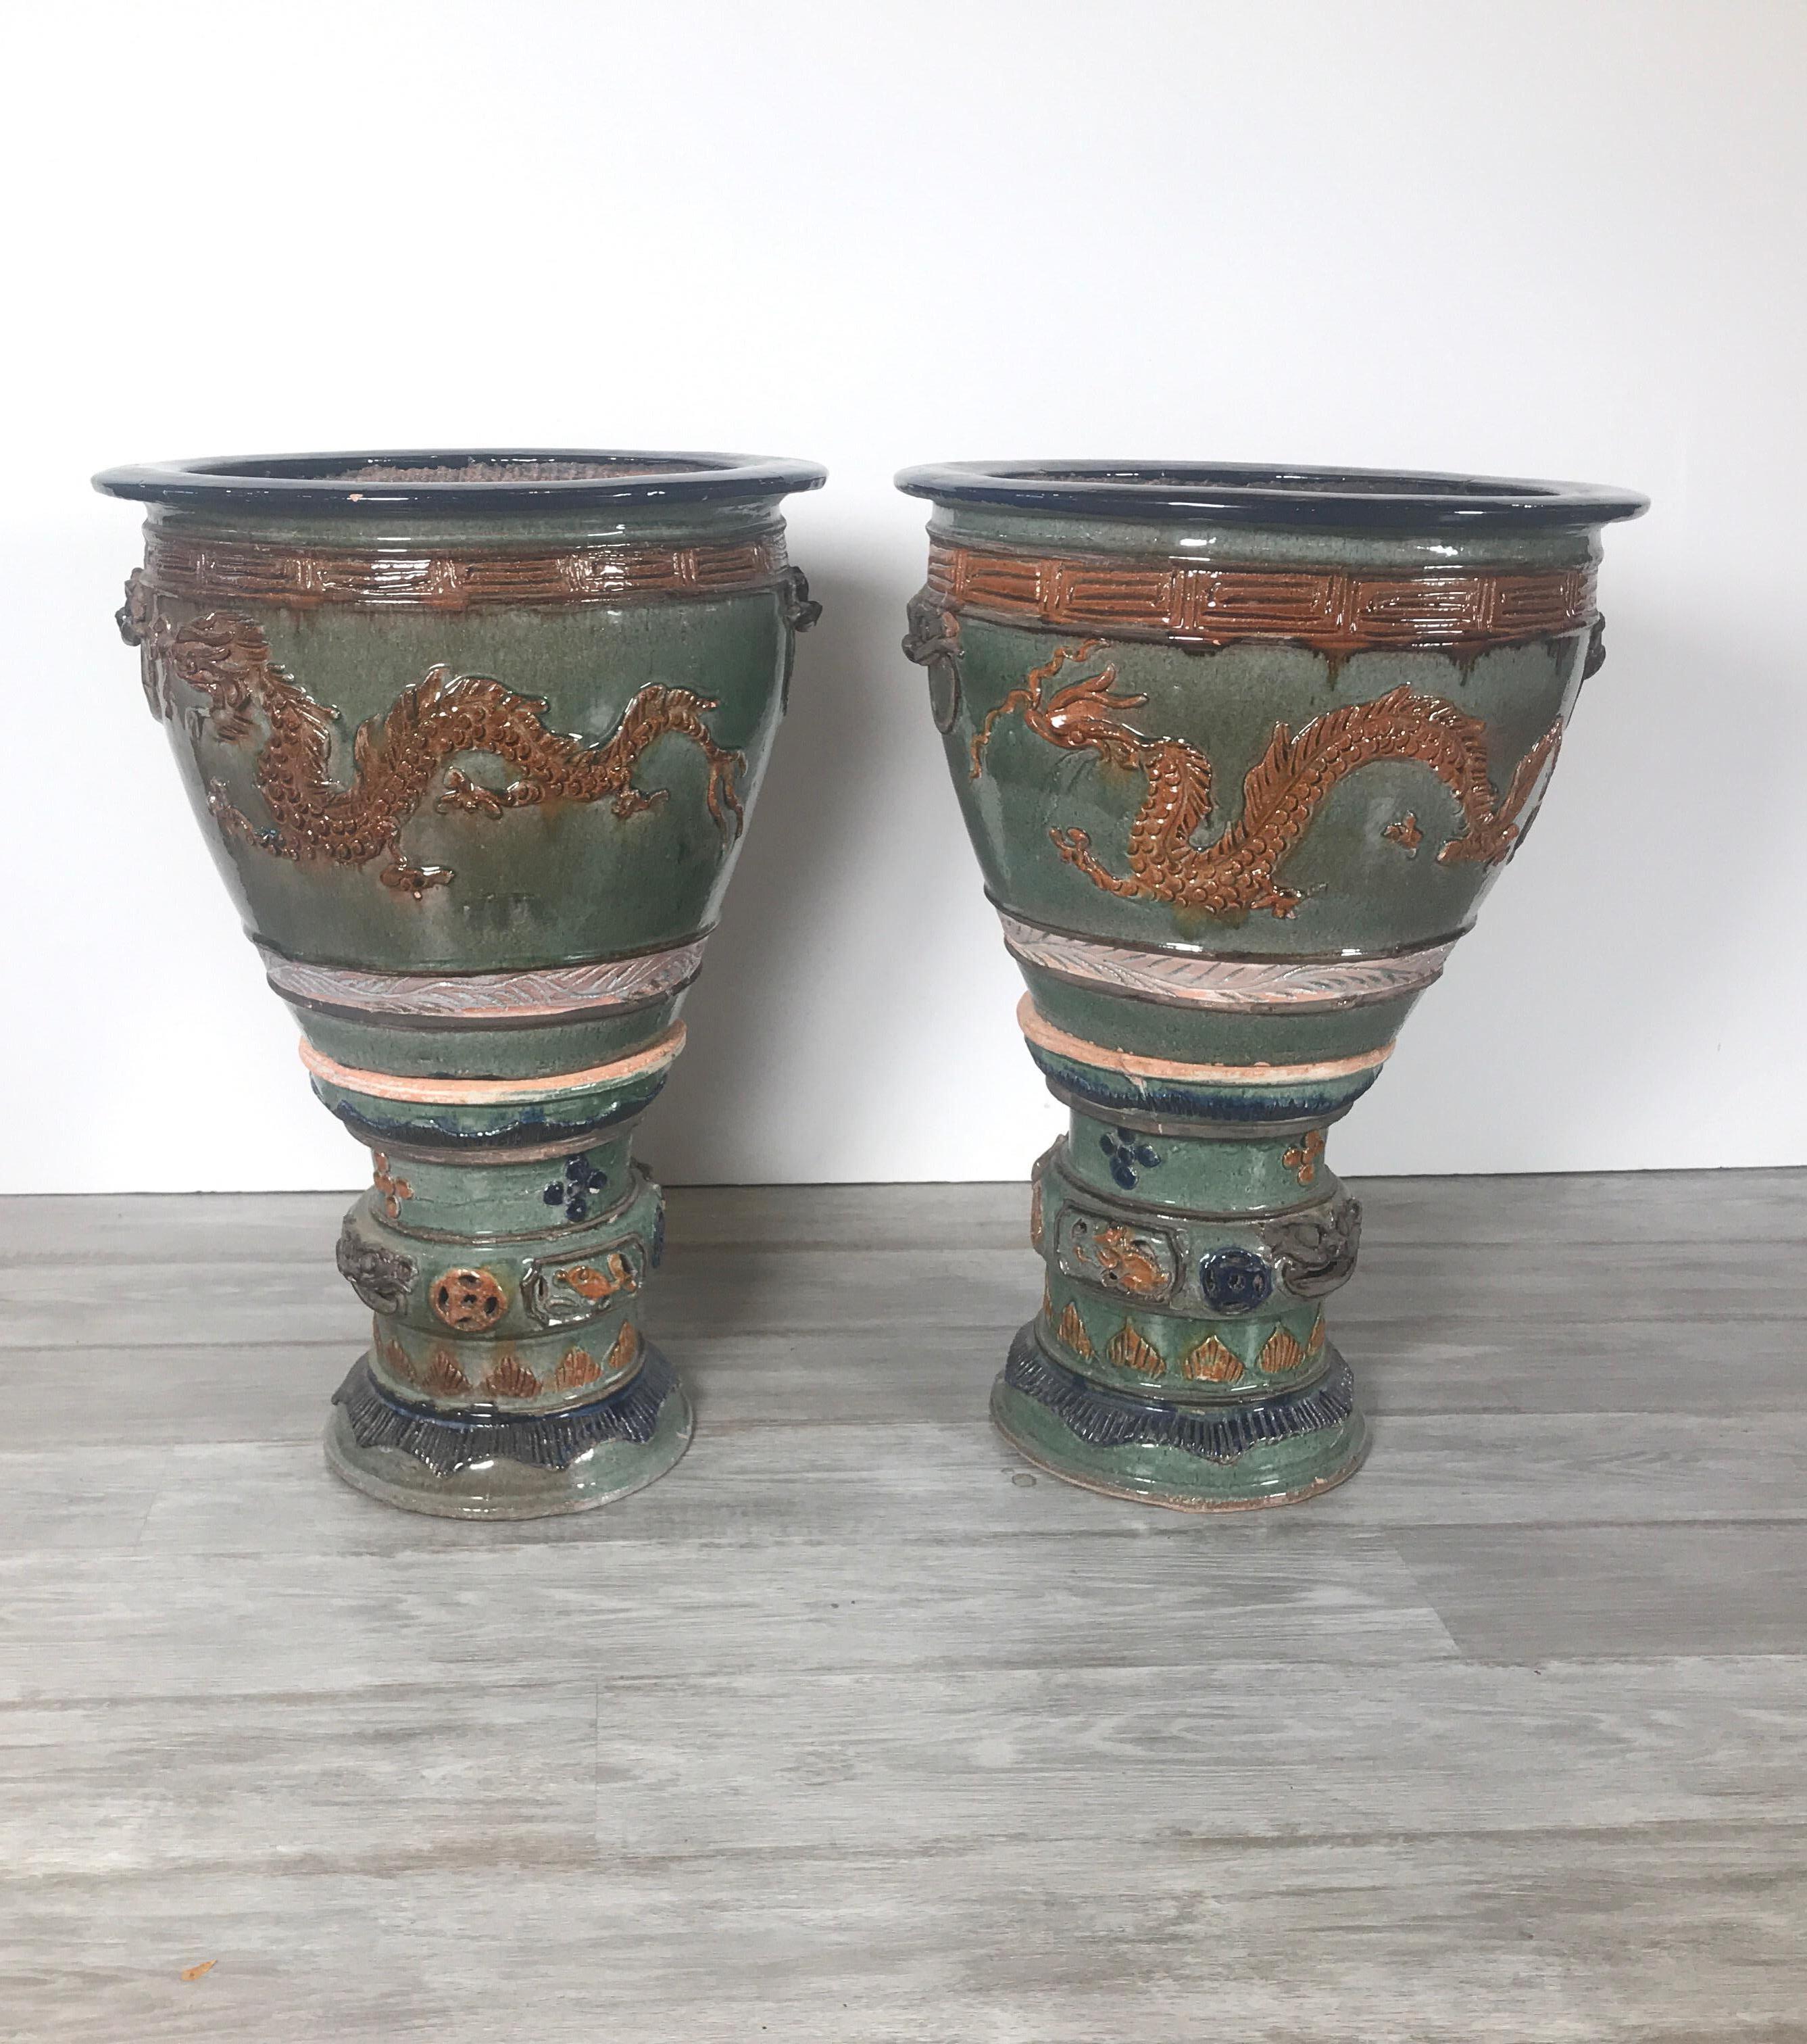 A vibrantly colored pair of planters with separate pedestal bases, Chinese, mid-20th century the terracotta with a bright glaze of sage green, cobalt blue, orange and brown in a dragon motif. Some expected minor chips on the edge. The pots with